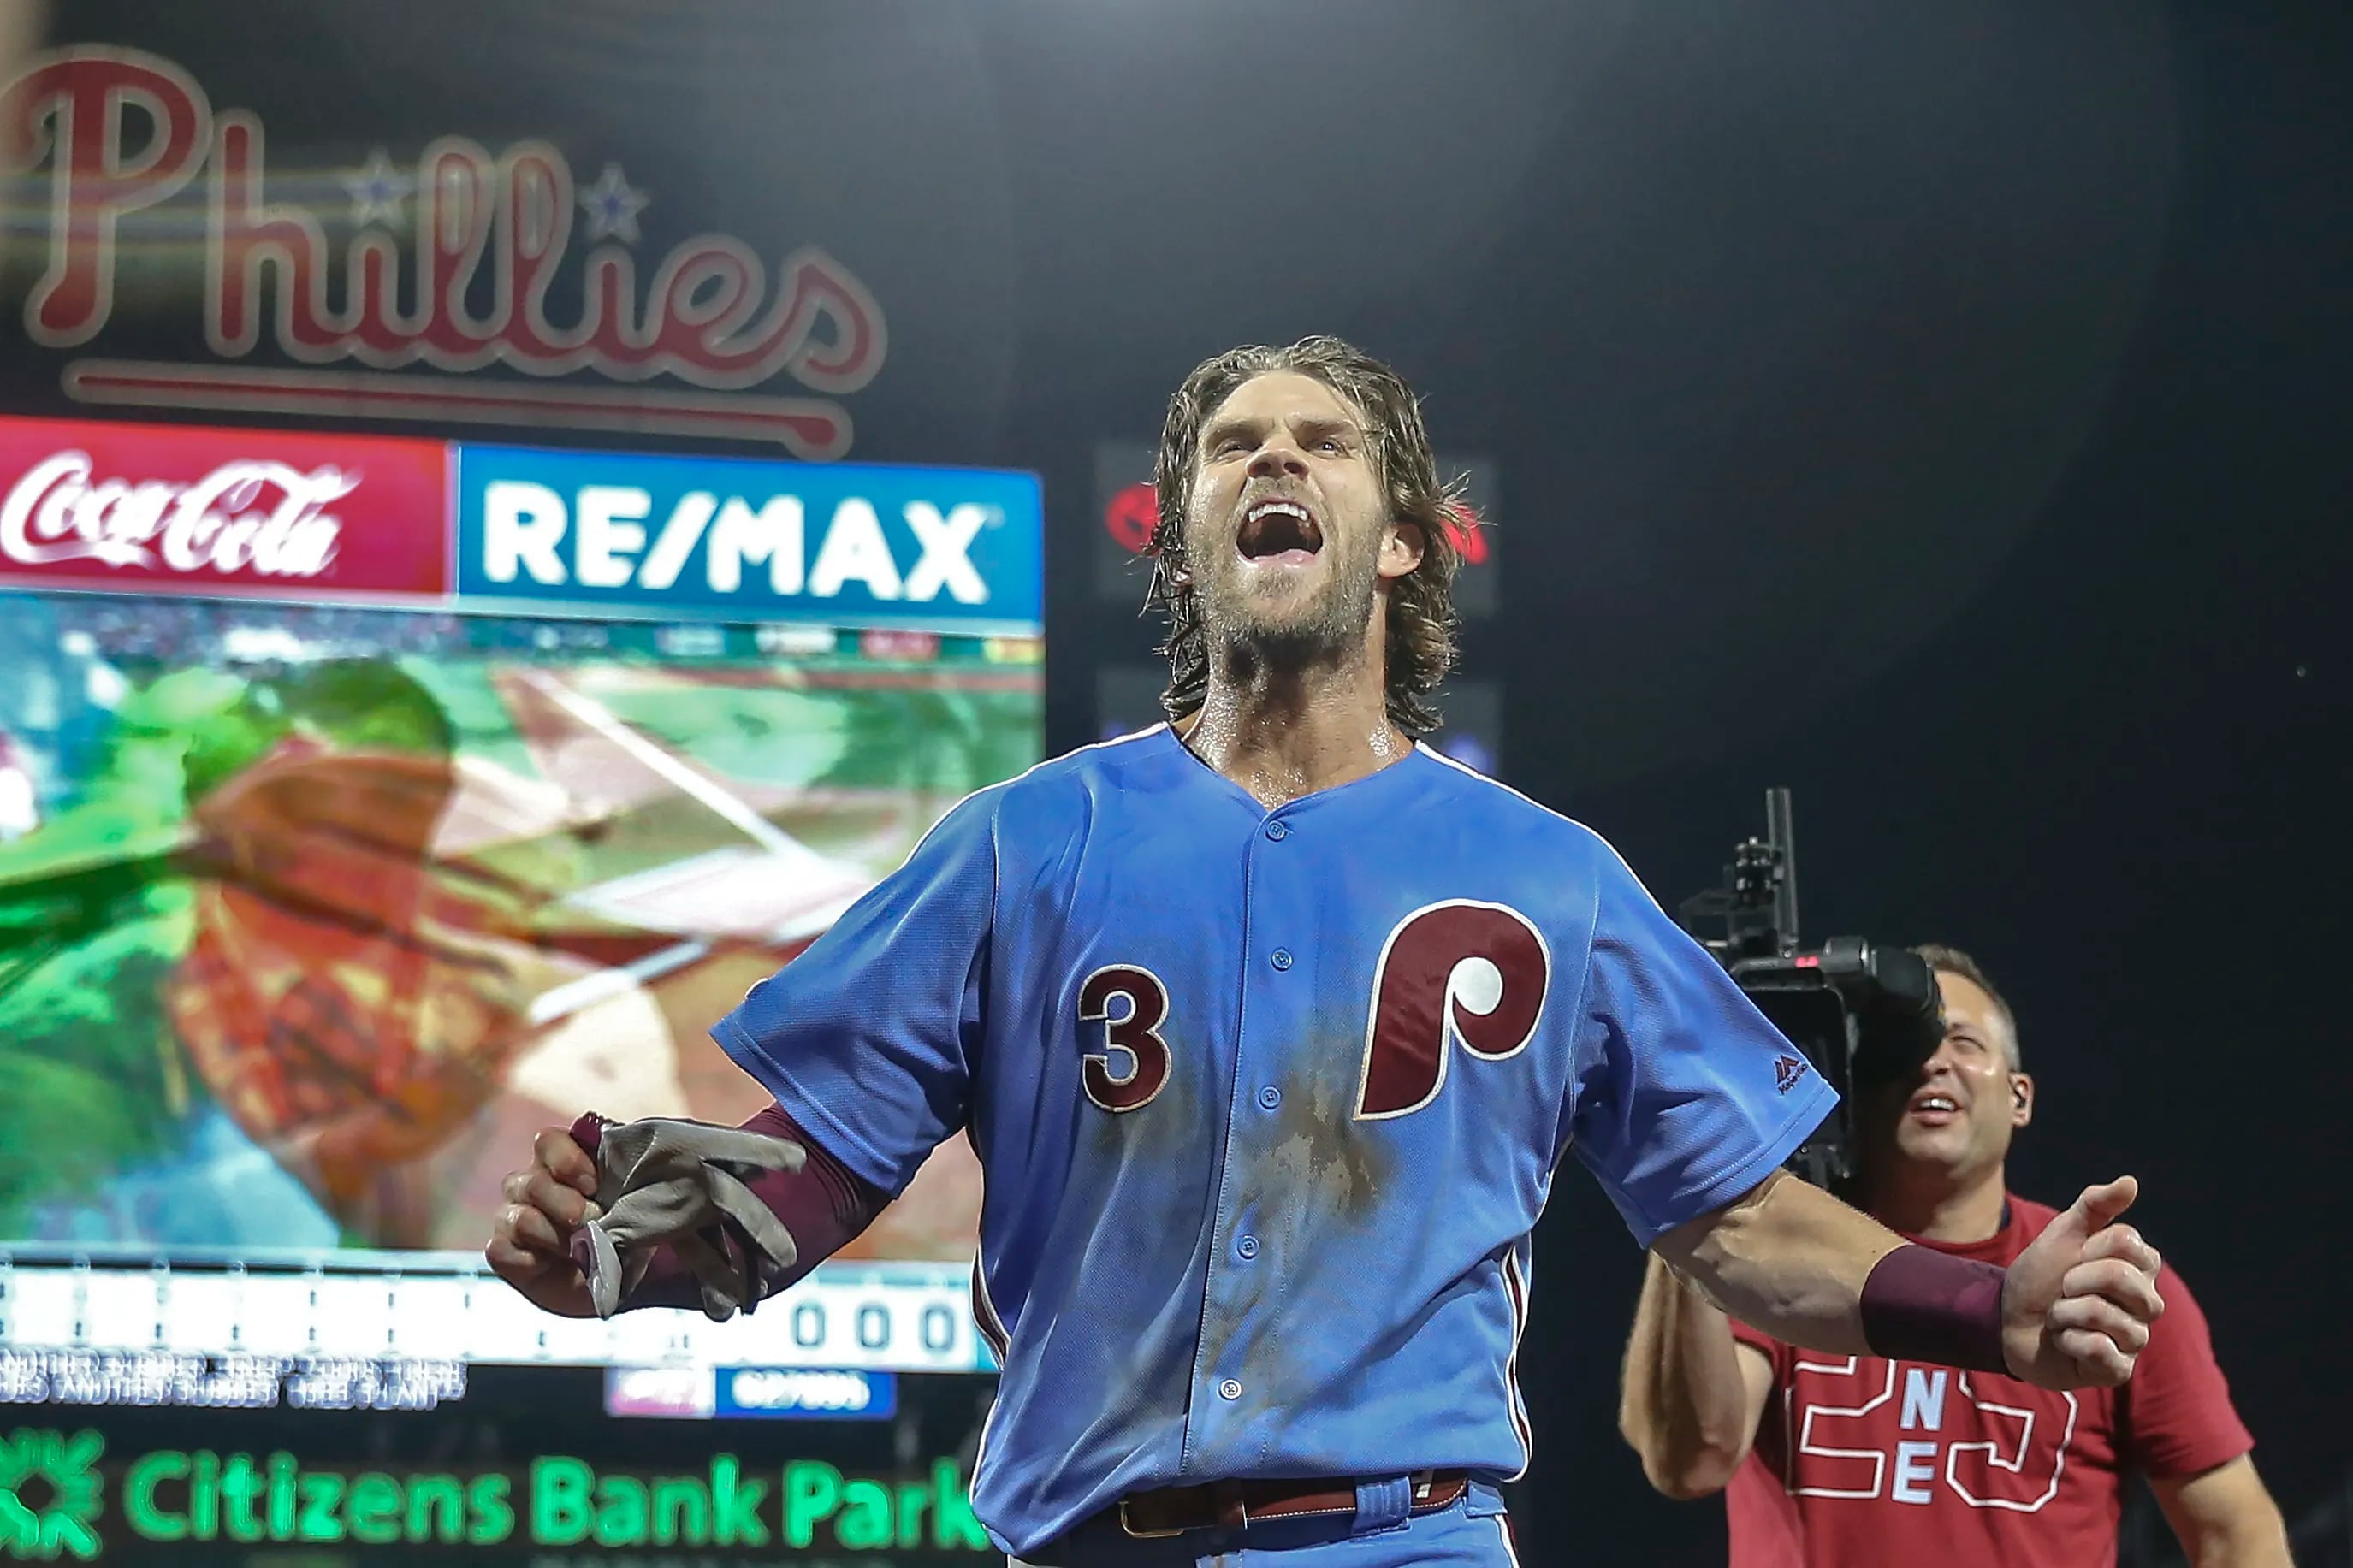 Bryce Harper hits walk-off grand slam for Phillies - The